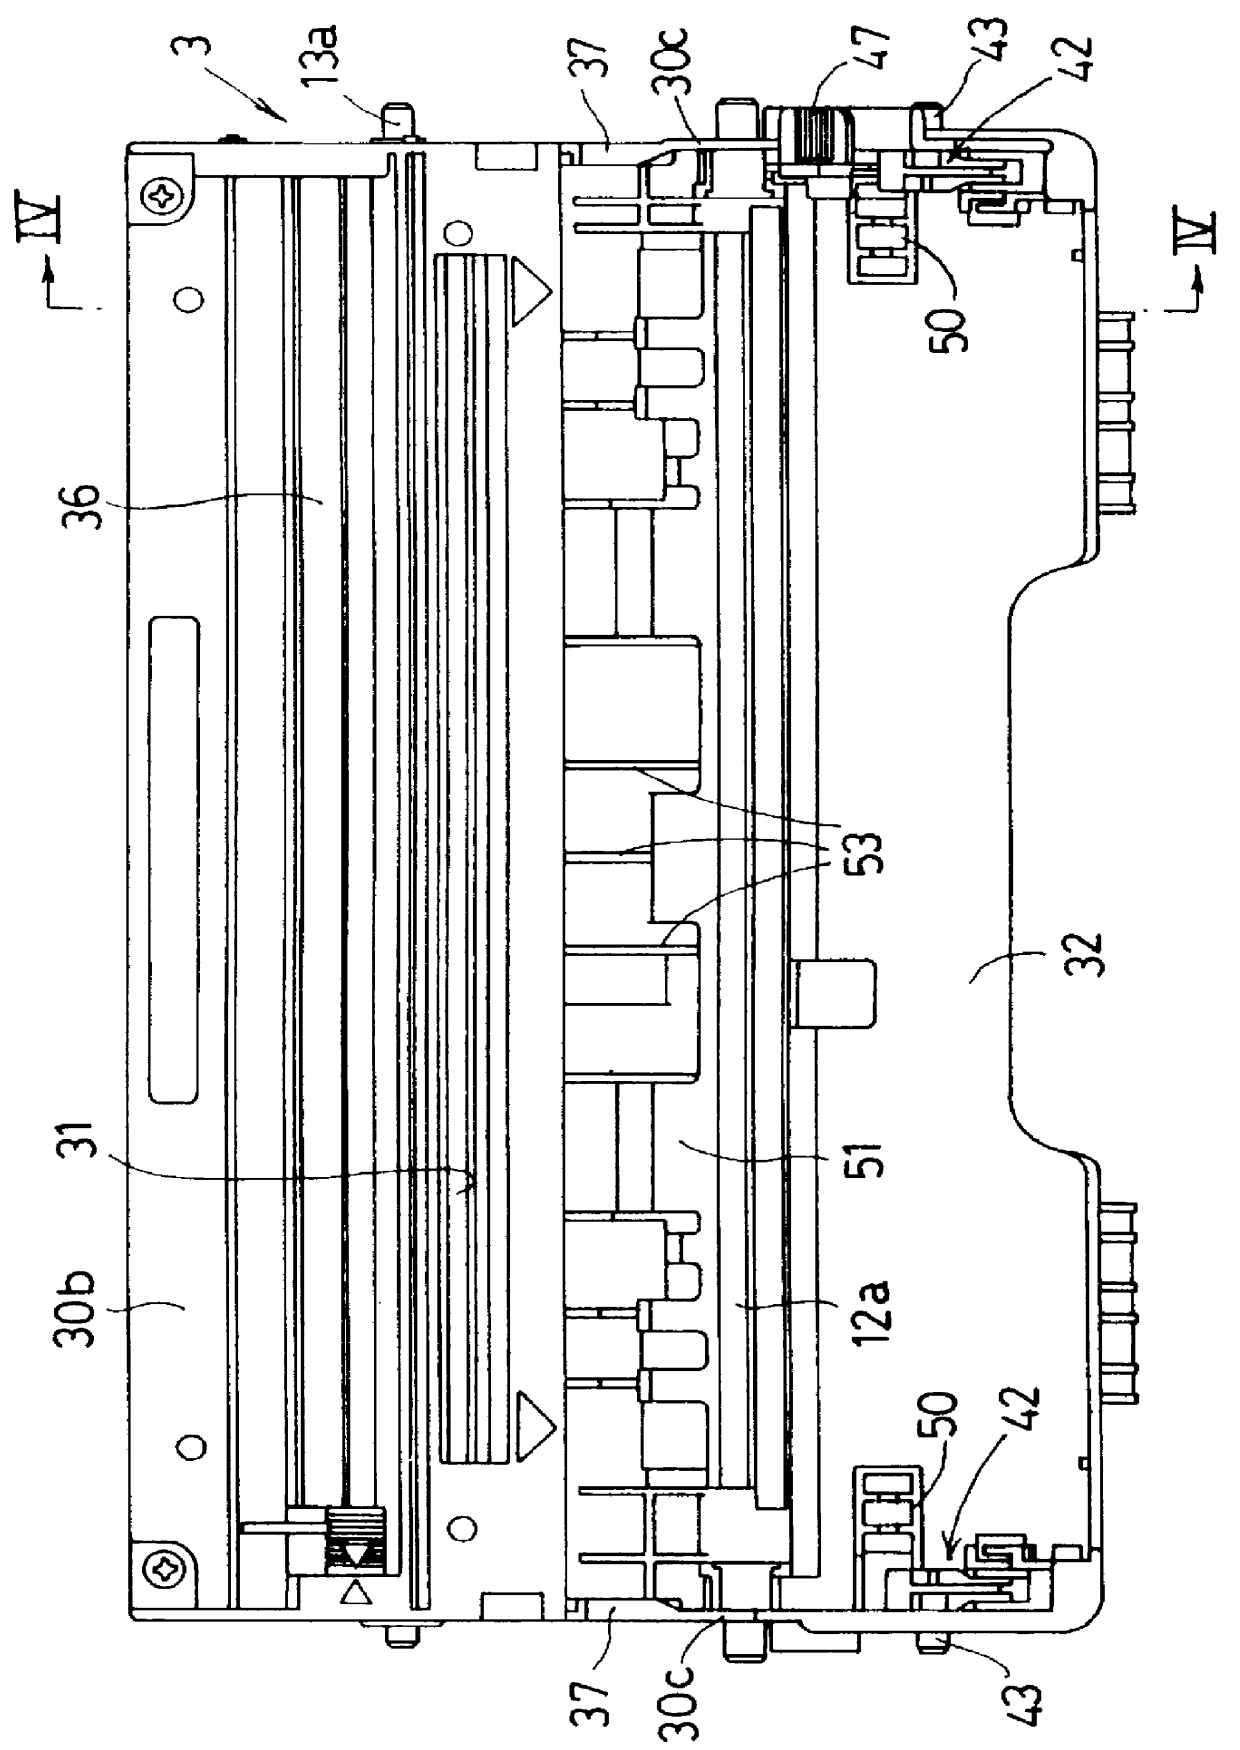 Photosensitive member cartridge and developer cartridge for use in an image-forming apparatus